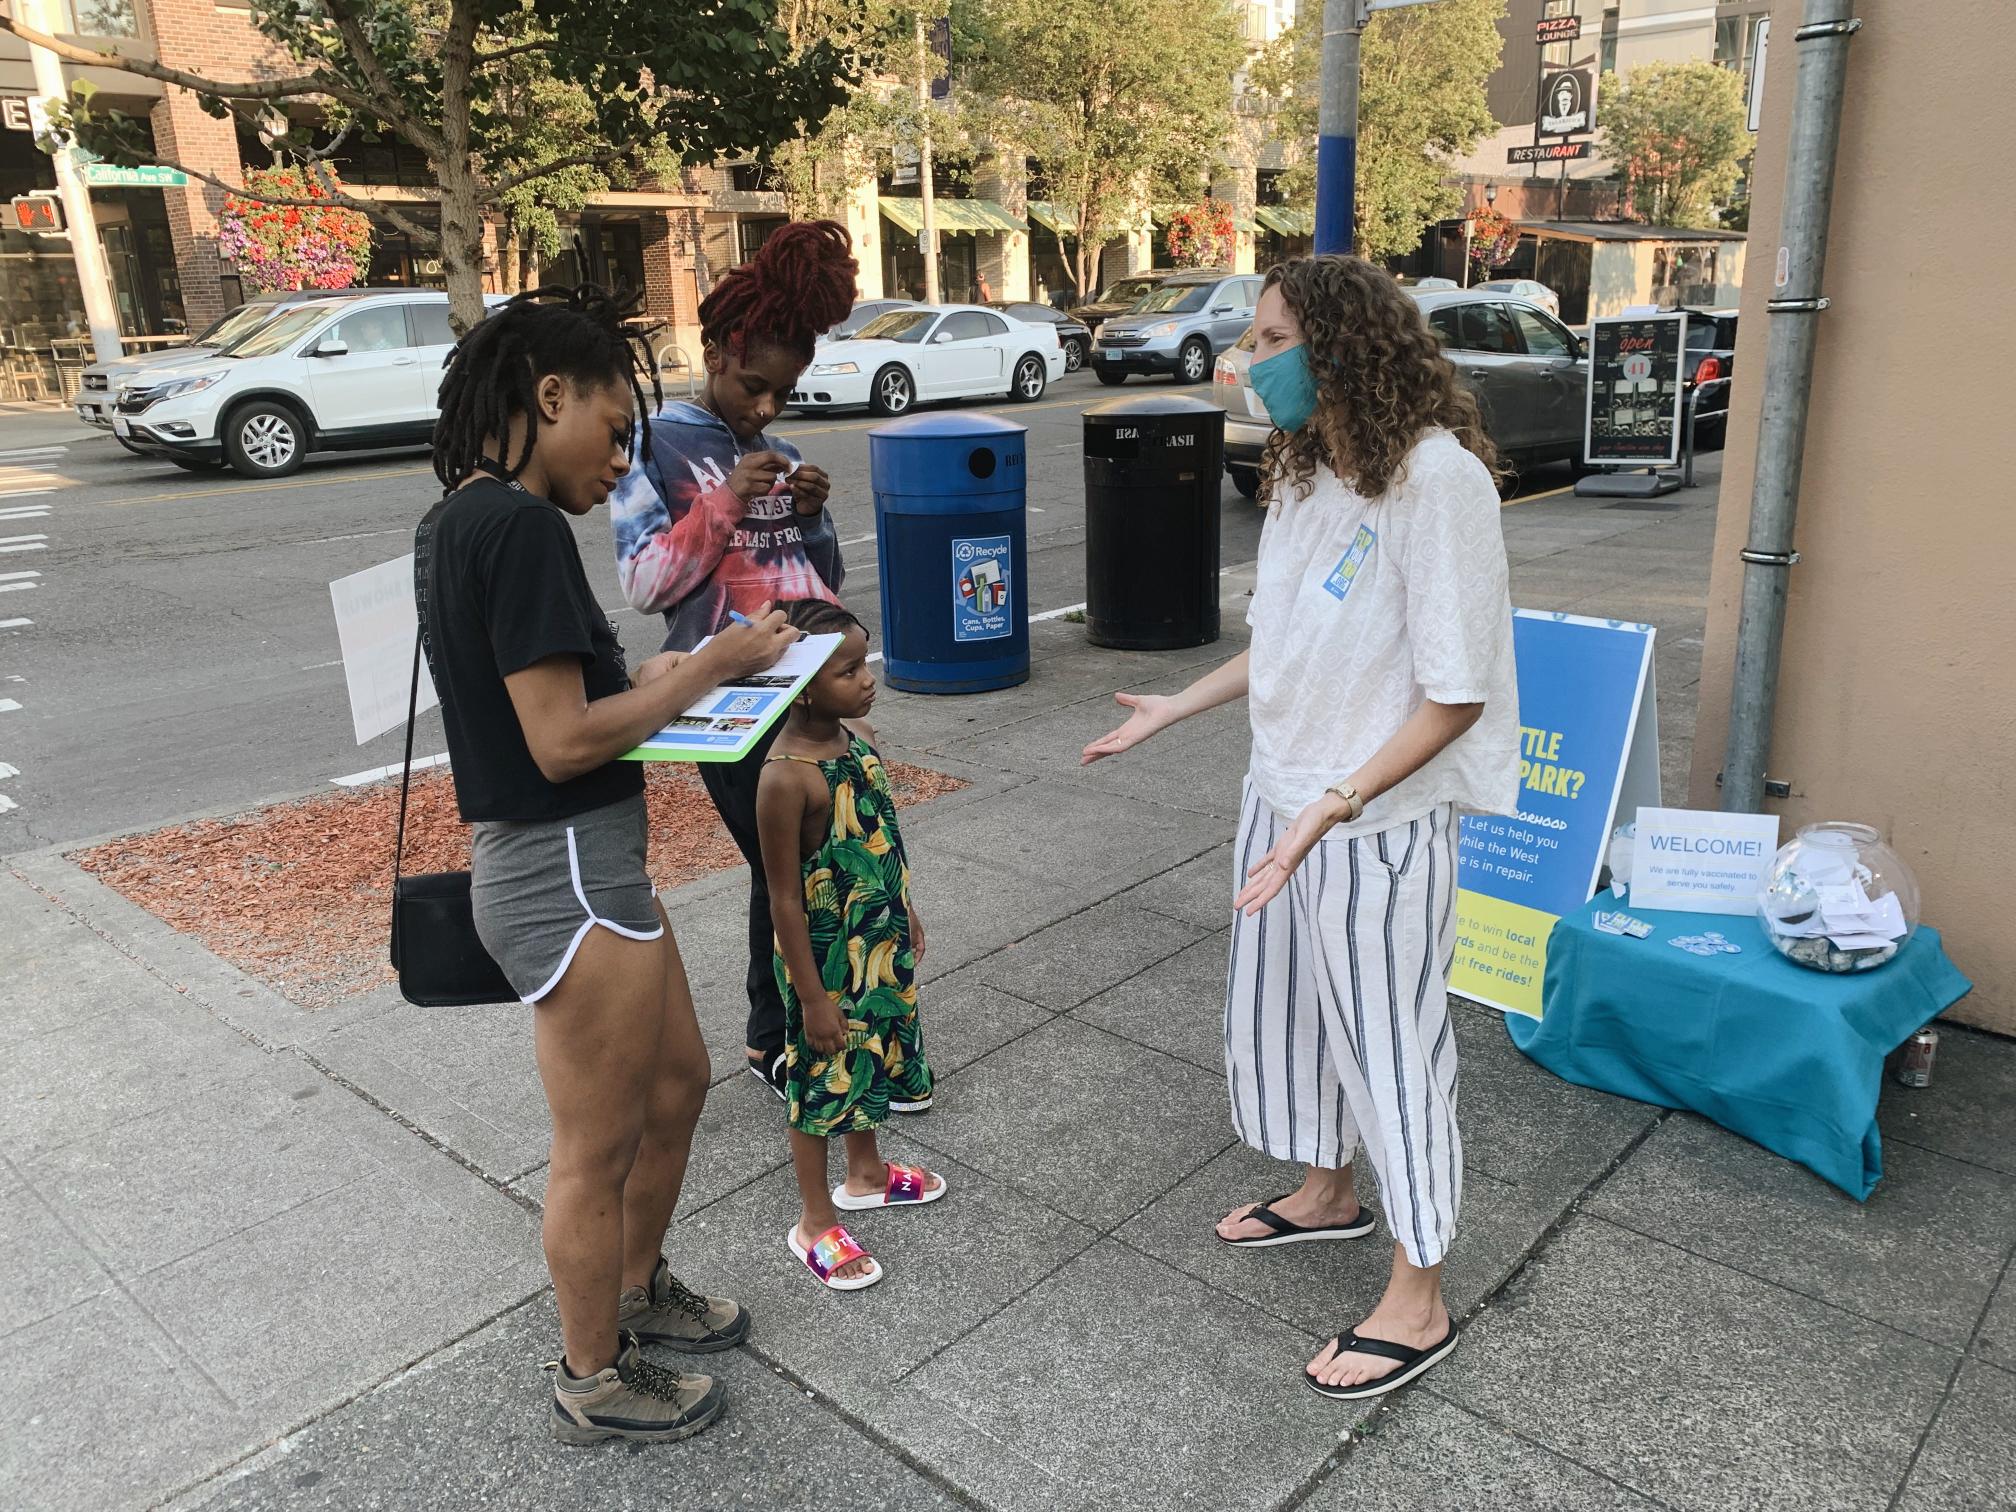 A member of the project team speaks with several community members in West Seattle in June 2021. A women and two younger residents are visible filling out a survey, and speaking with the project representative. Several cars and sections of sidewalk and roadway are visible in the background.